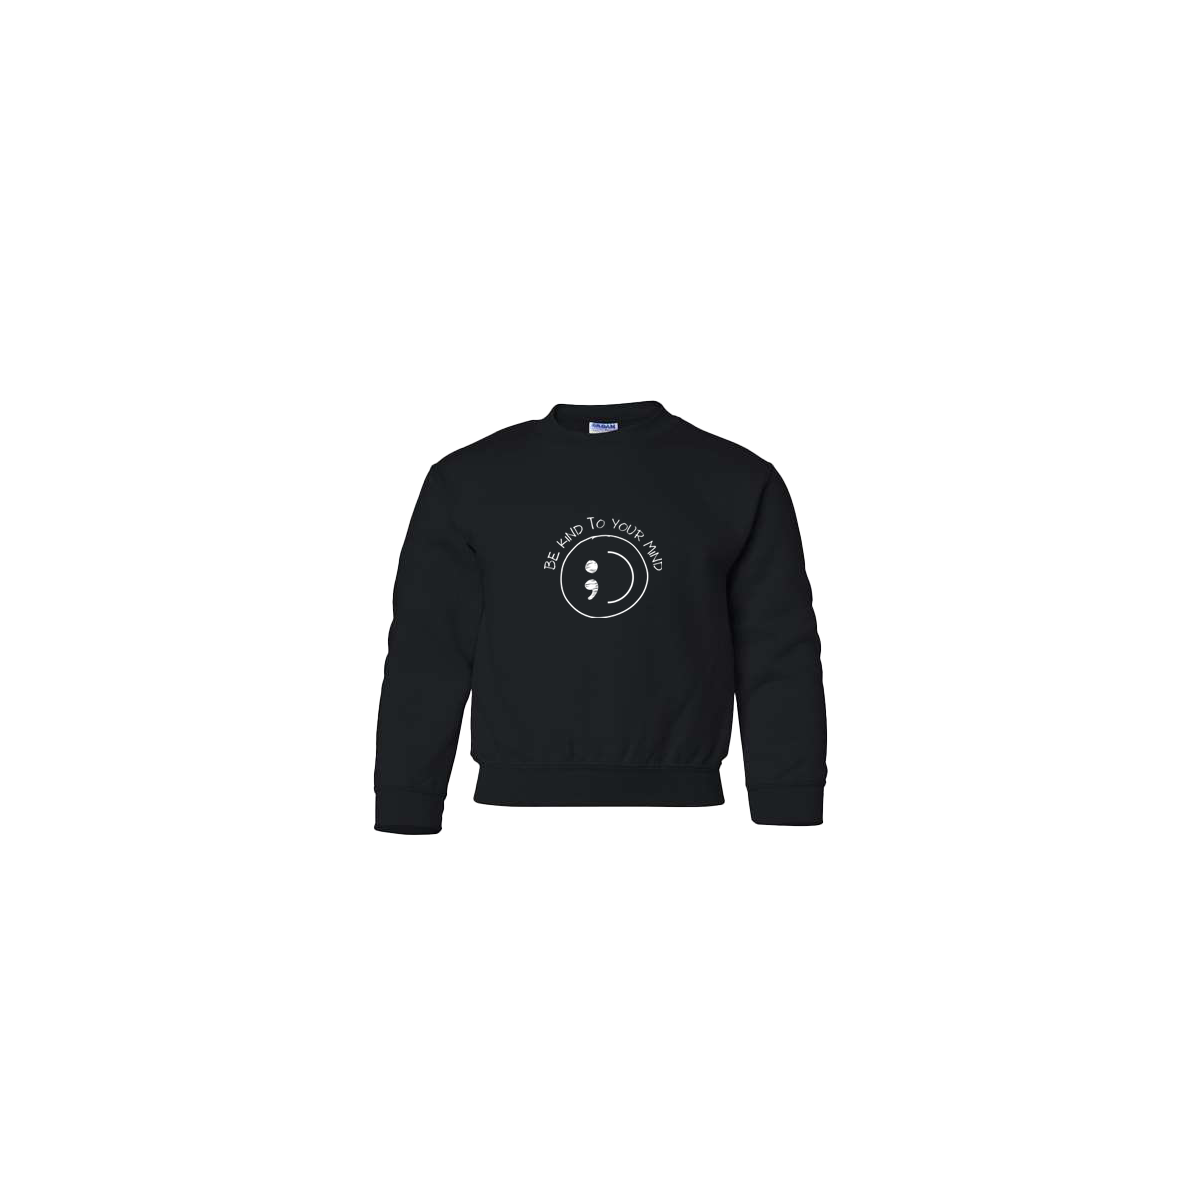 Be Kind To Your Mind Smiley Face Embroidered Black Youth Crewneck